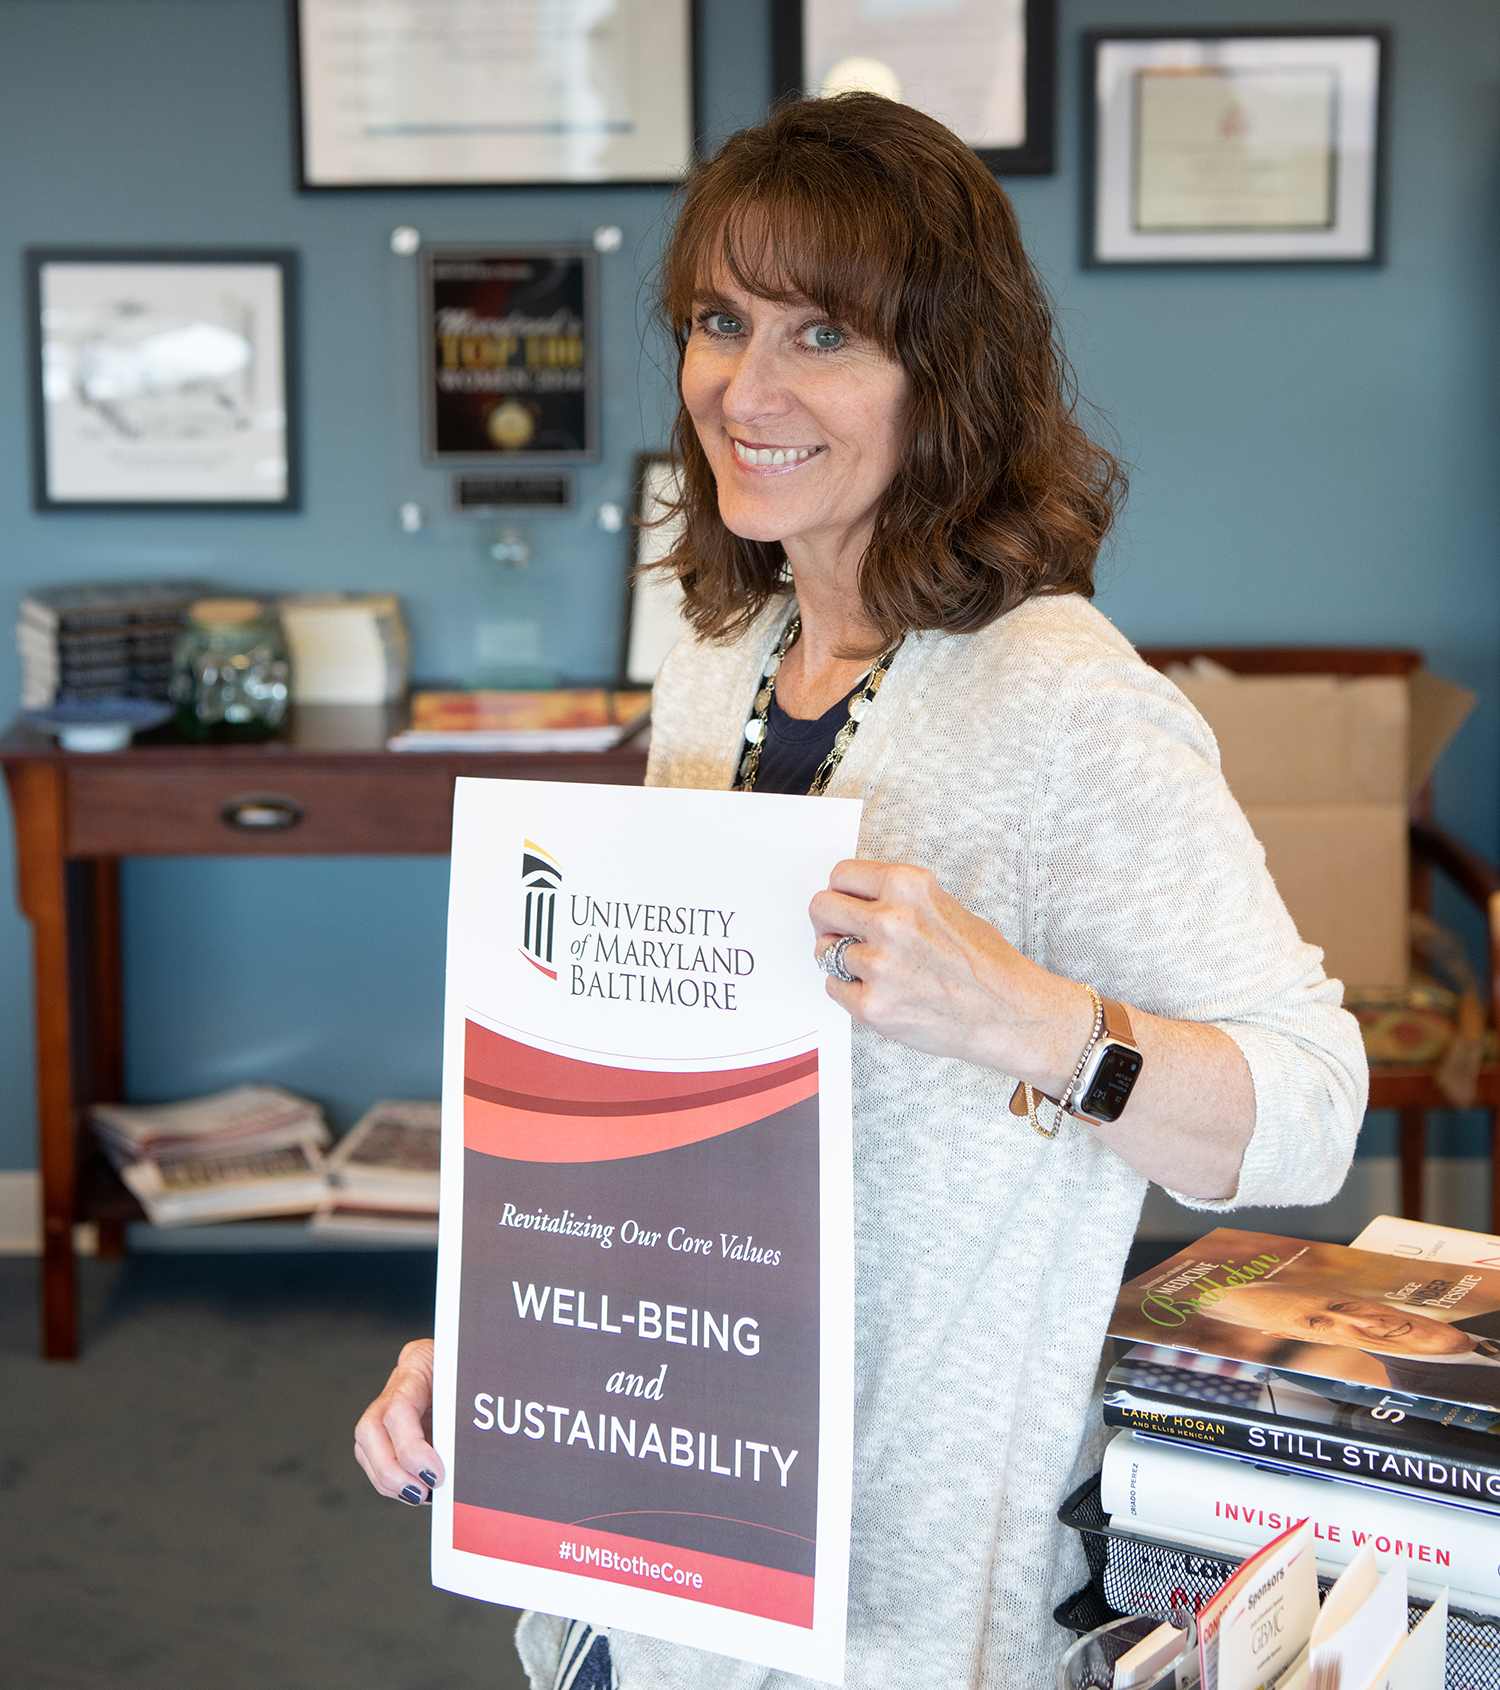 Jennifer Litchman holding Well-Being and Sustainability sign